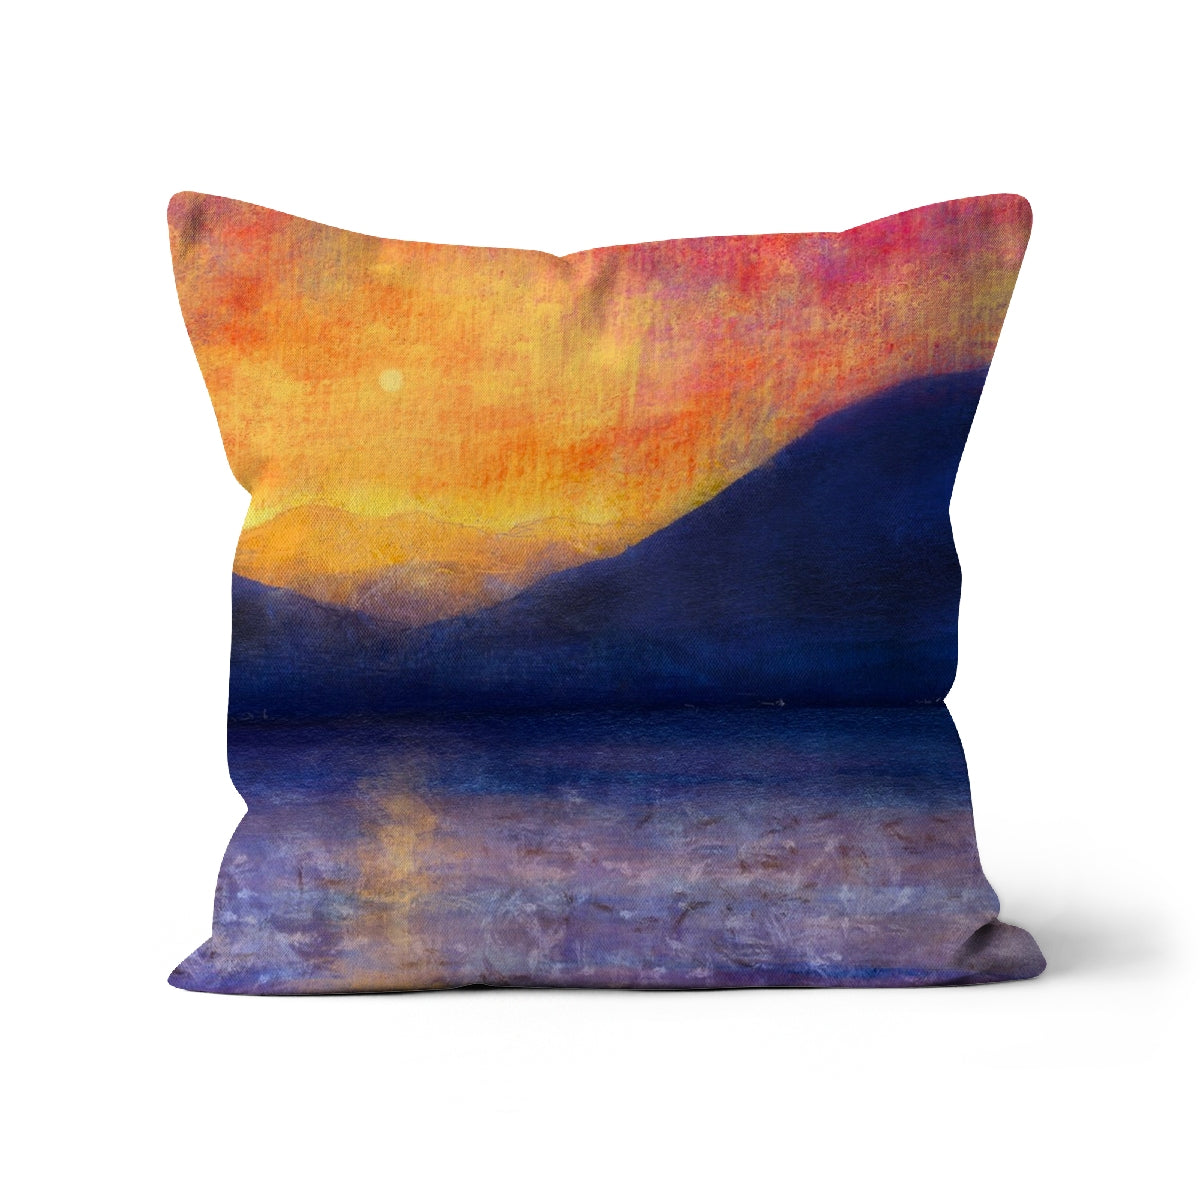 Sunset Approaching Mull Art Gifts Cushion-Cushions-Hebridean Islands Art Gallery-Linen-12"x12"-Paintings, Prints, Homeware, Art Gifts From Scotland By Scottish Artist Kevin Hunter